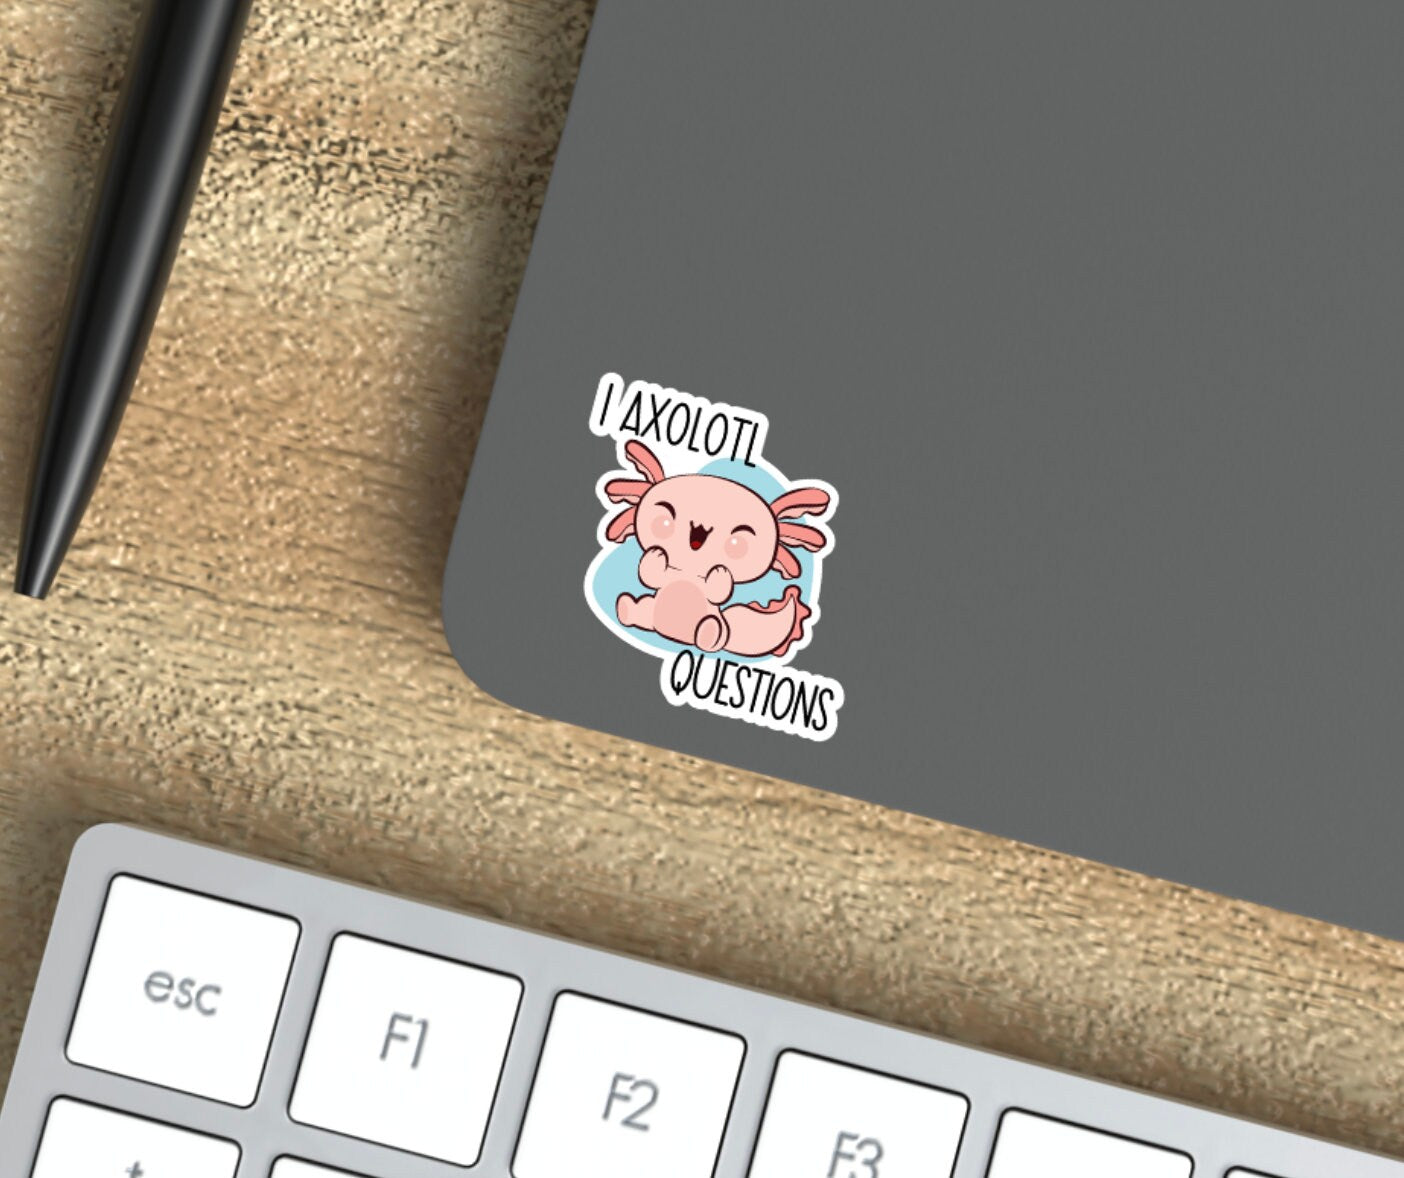 I axolotl questions sticker reading questions sassy funny reading reading stickers for laptops and water bottle sticker decal books decal